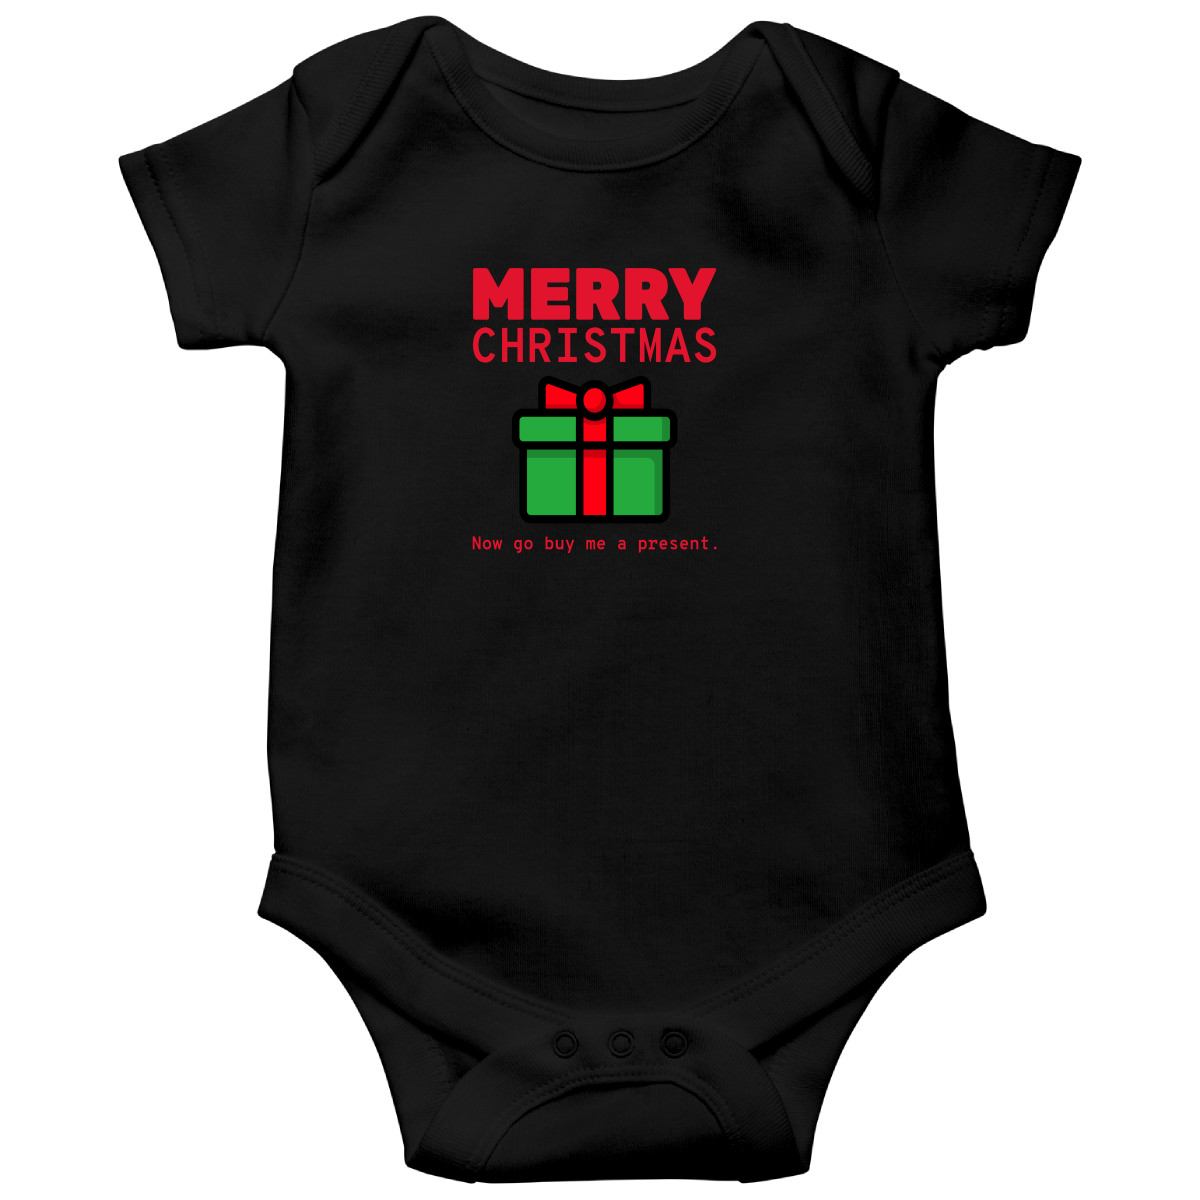 Merry Christmas Now Go Buy Me a Present Baby Bodysuits